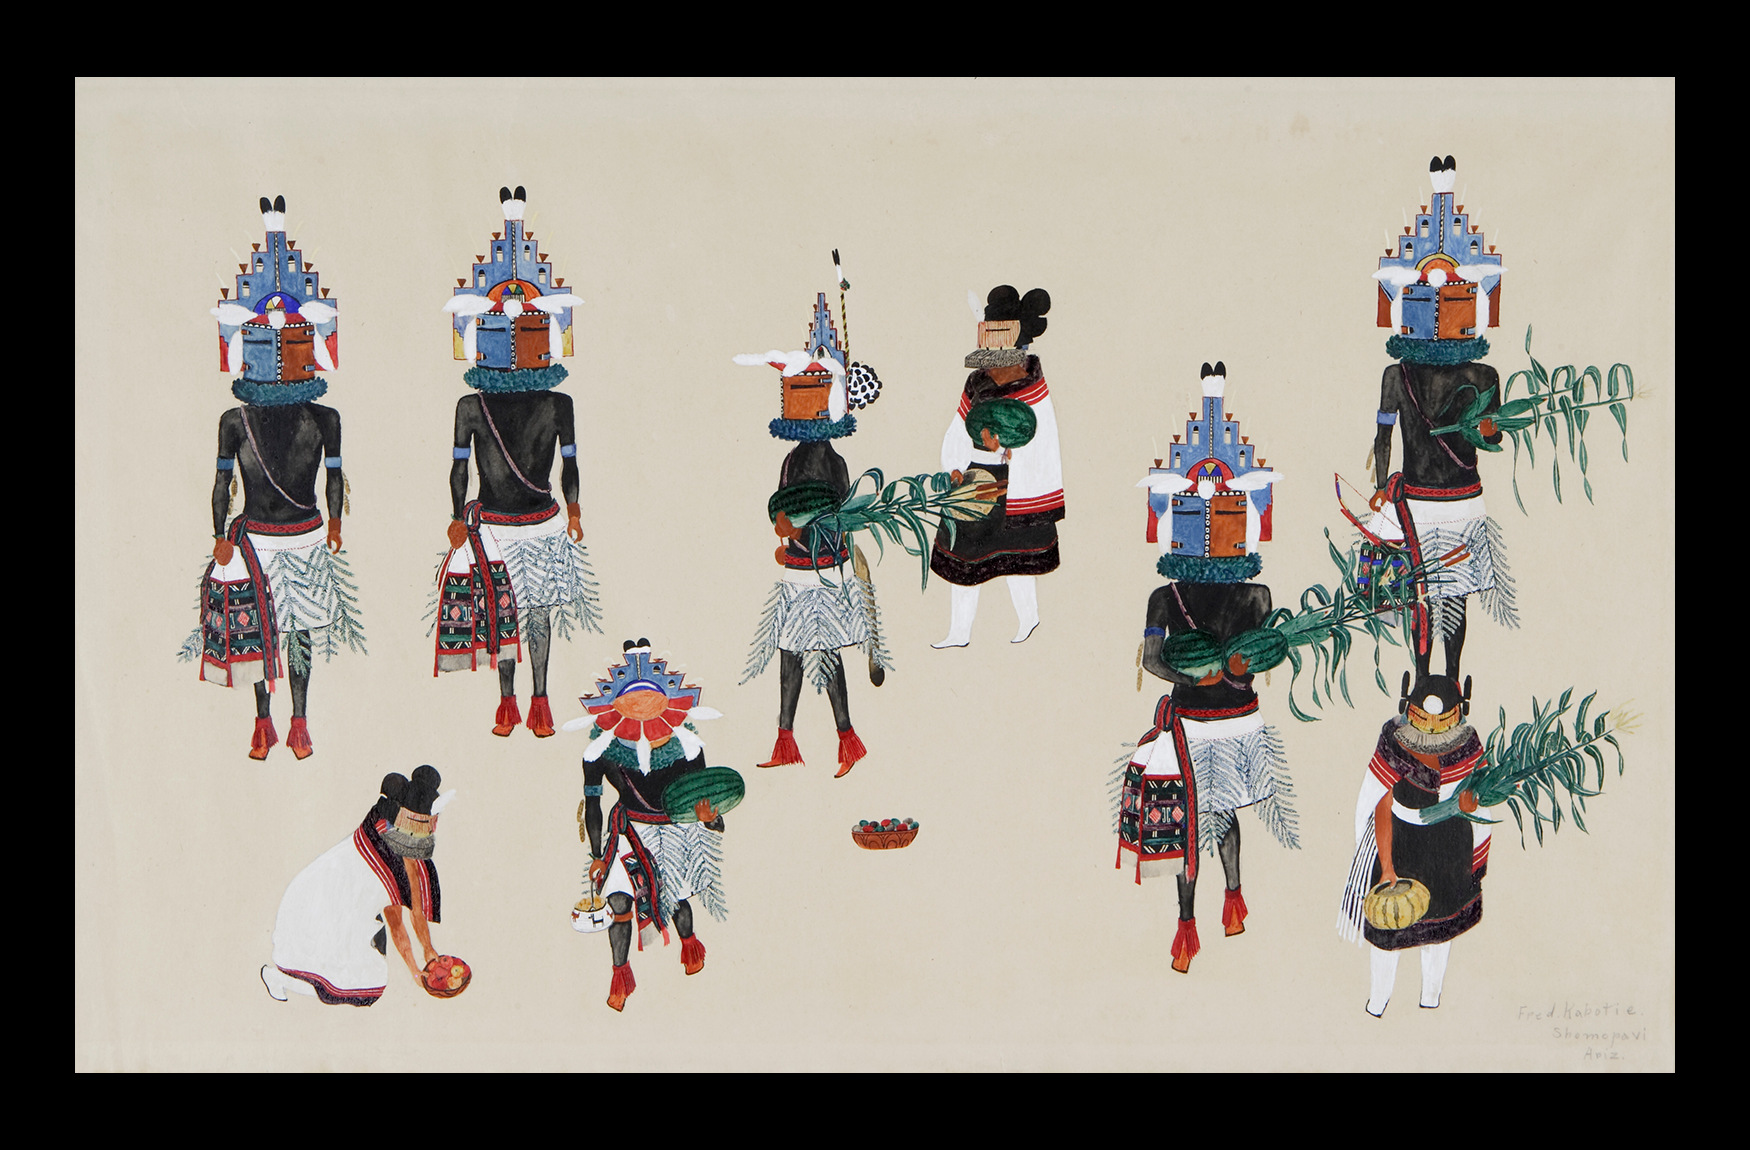 Fred Kabotie. Niman Kachina Dance, 1920. Paper, watercolor. 15 x 24 in. IAF.P22. Photograph by Addison Doty. Copyright 2011 SAR.